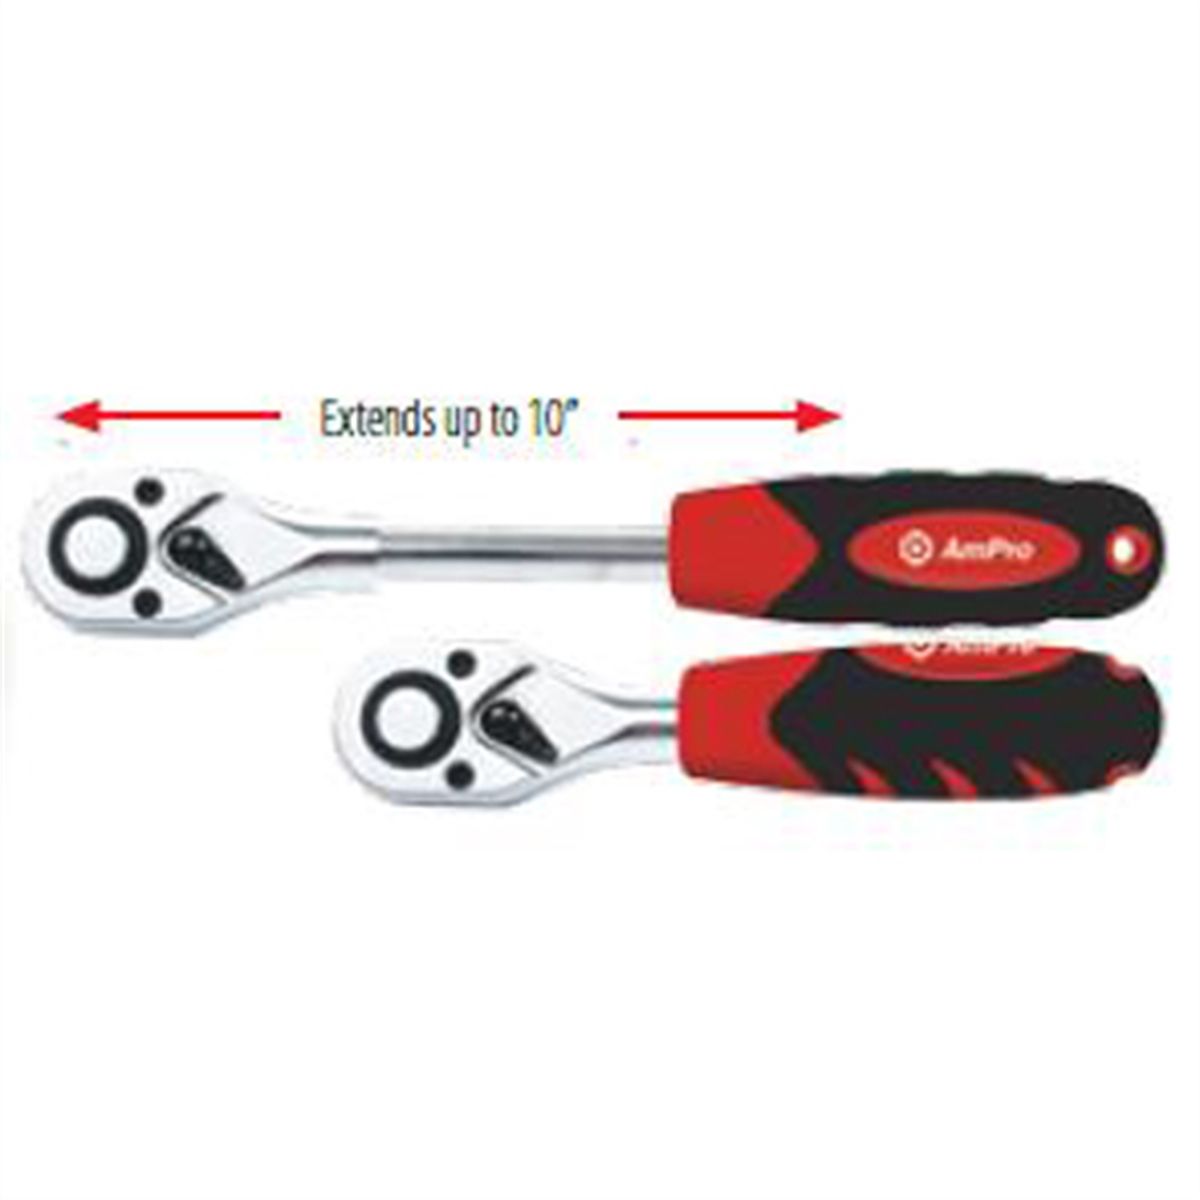 2-IN-1 1/2" Dr Extend Ratchet